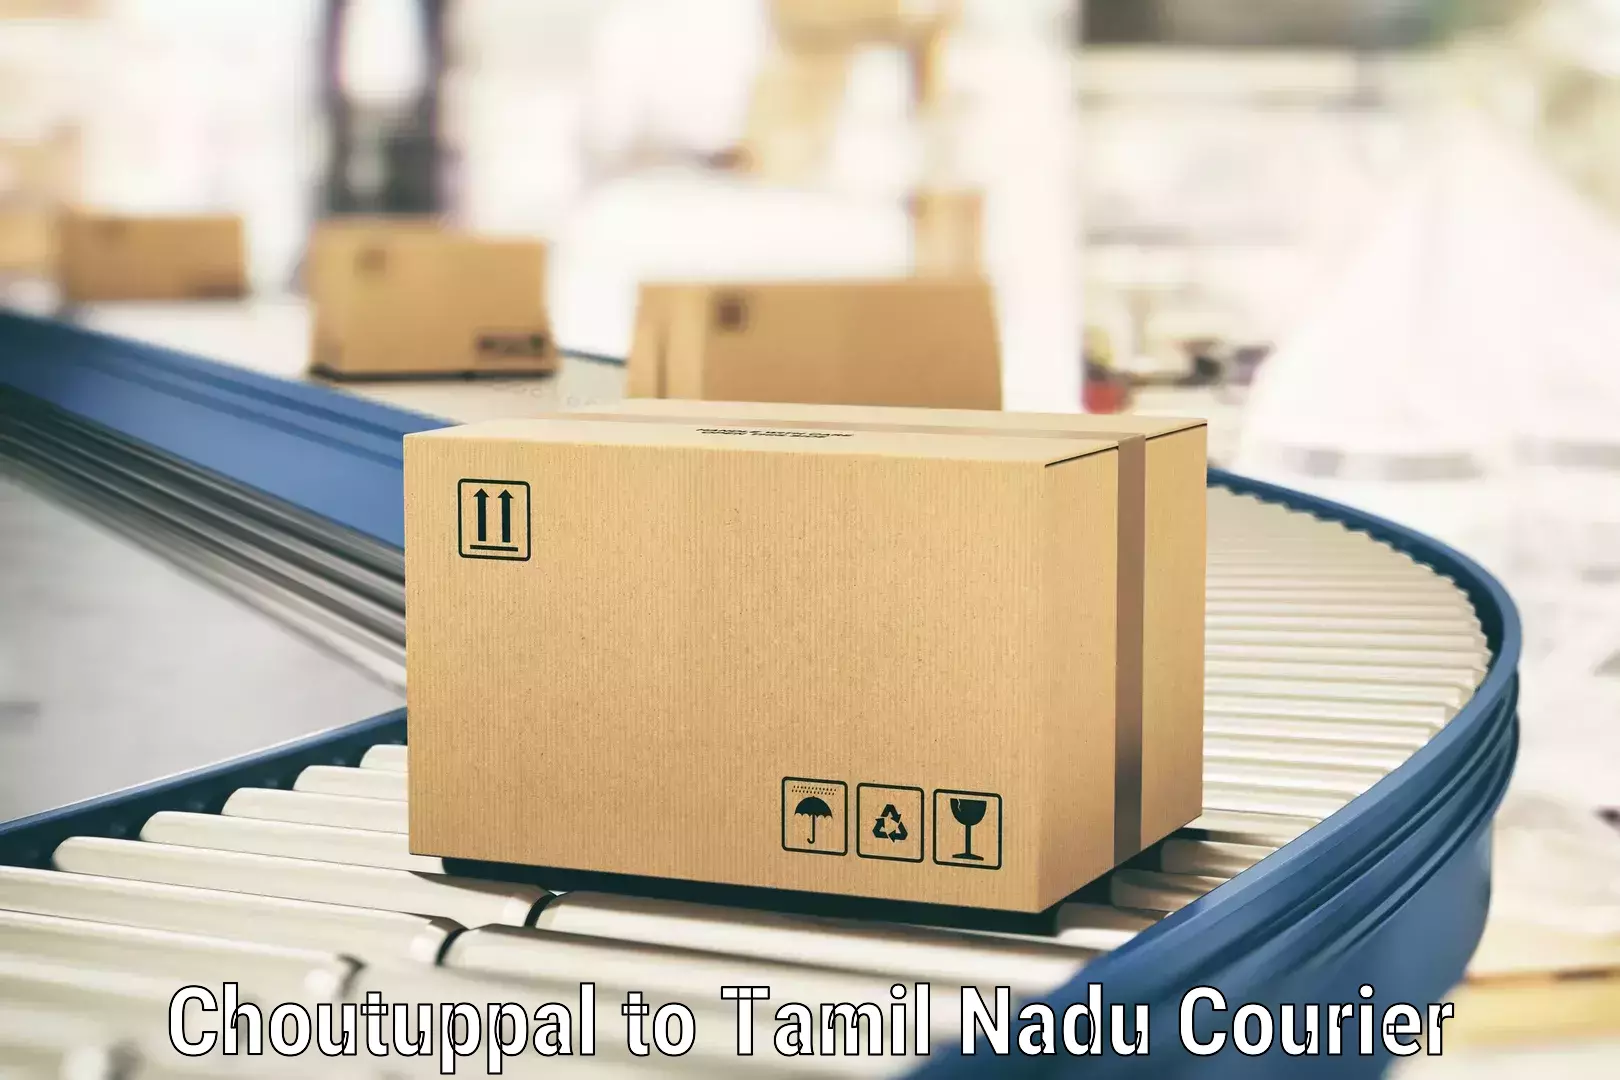 Multi-national courier services Choutuppal to Omalur